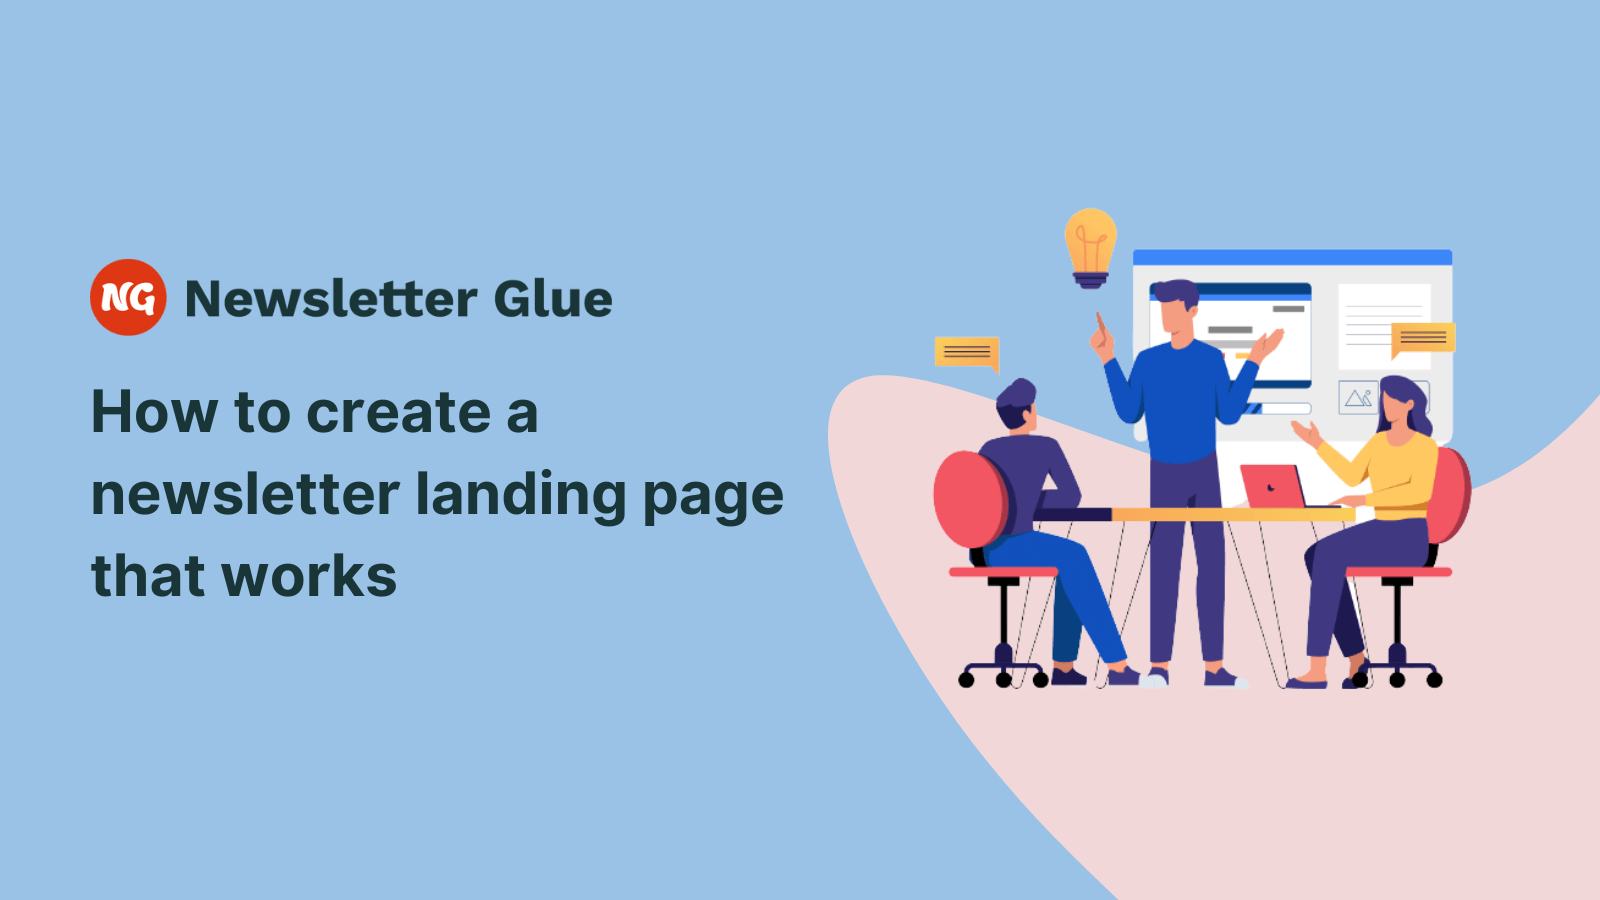 How to create a newsletter landing page that works